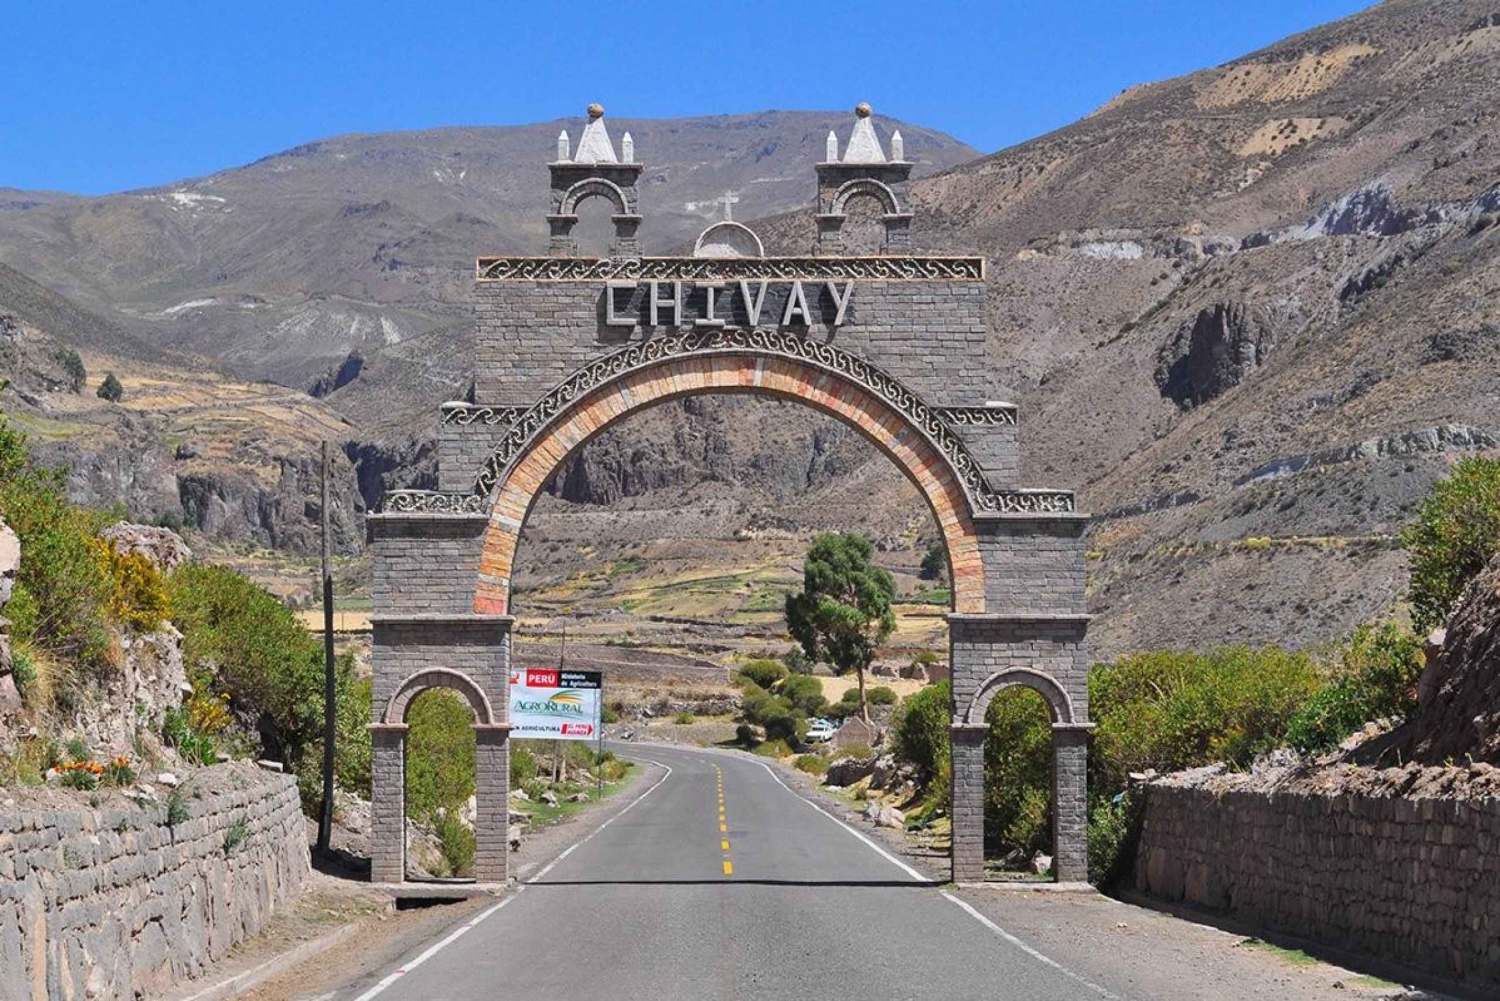 Arequipa: Excursion Colca Canyon + Chacapi Thermal Baths